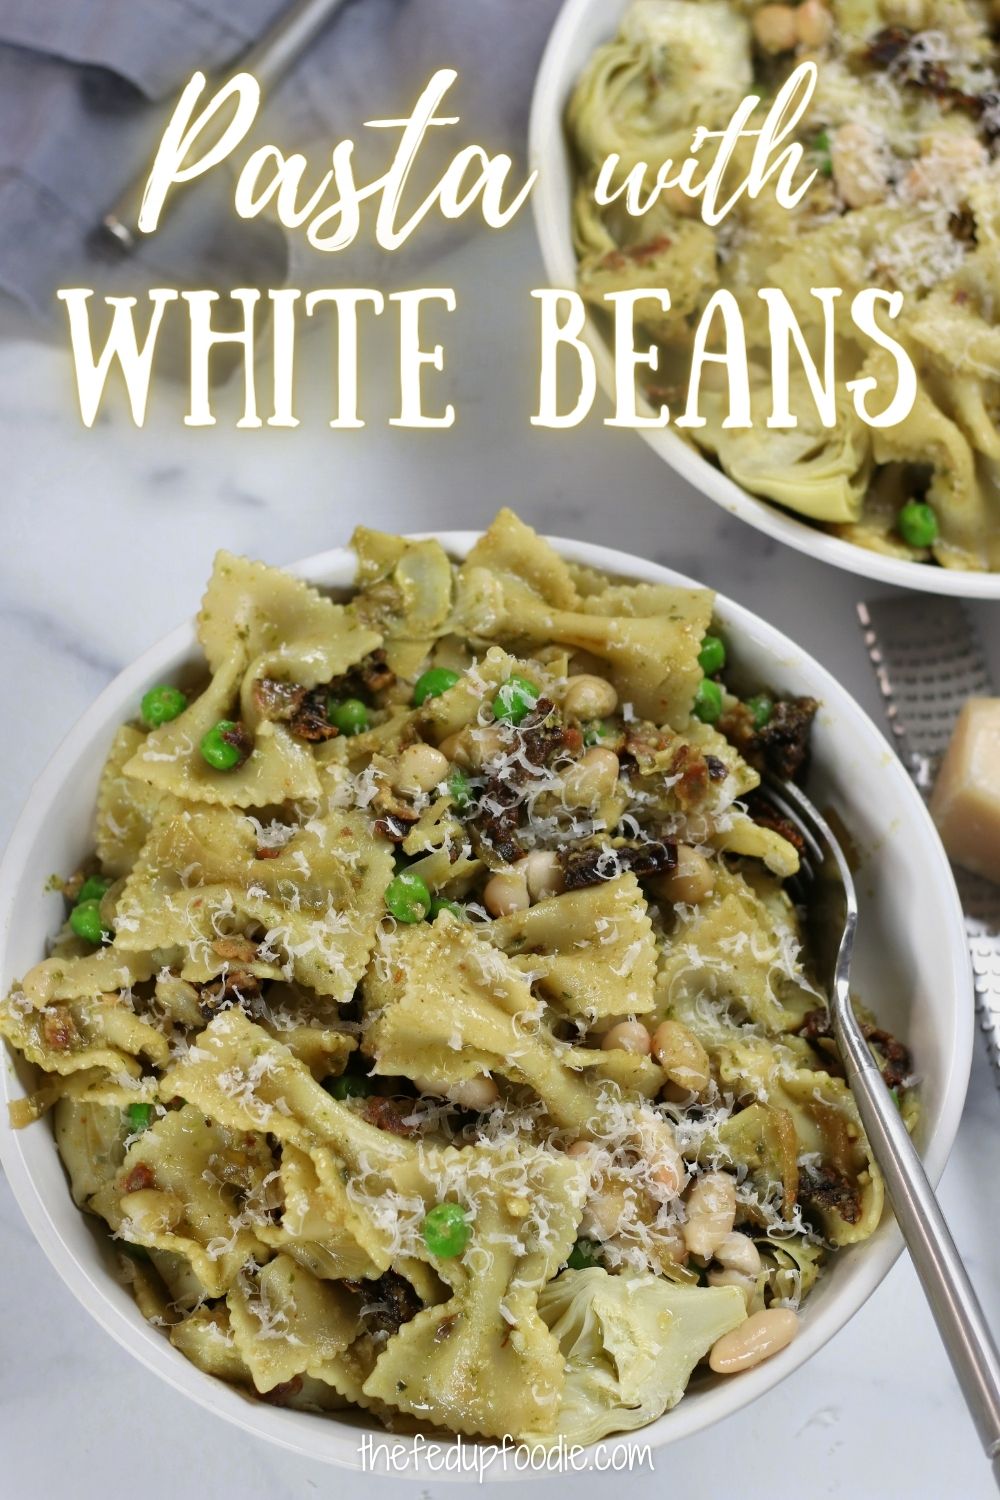 Pasta with White Beans is a perfect under 30 minute meal to throw together for company or if you are craving a scrumptious Italian meal. A satisfying pasta dish that is loaded with the flavors of bacon, pesto and sun-dried tomatoes. 
#PatsaWithWhiteBeans #CanelliBeanRecipe #CanneliBeansRecipe #PastaWithCannelliniBeans #PastaAndBeansRecipe #WhiteBeanPasta